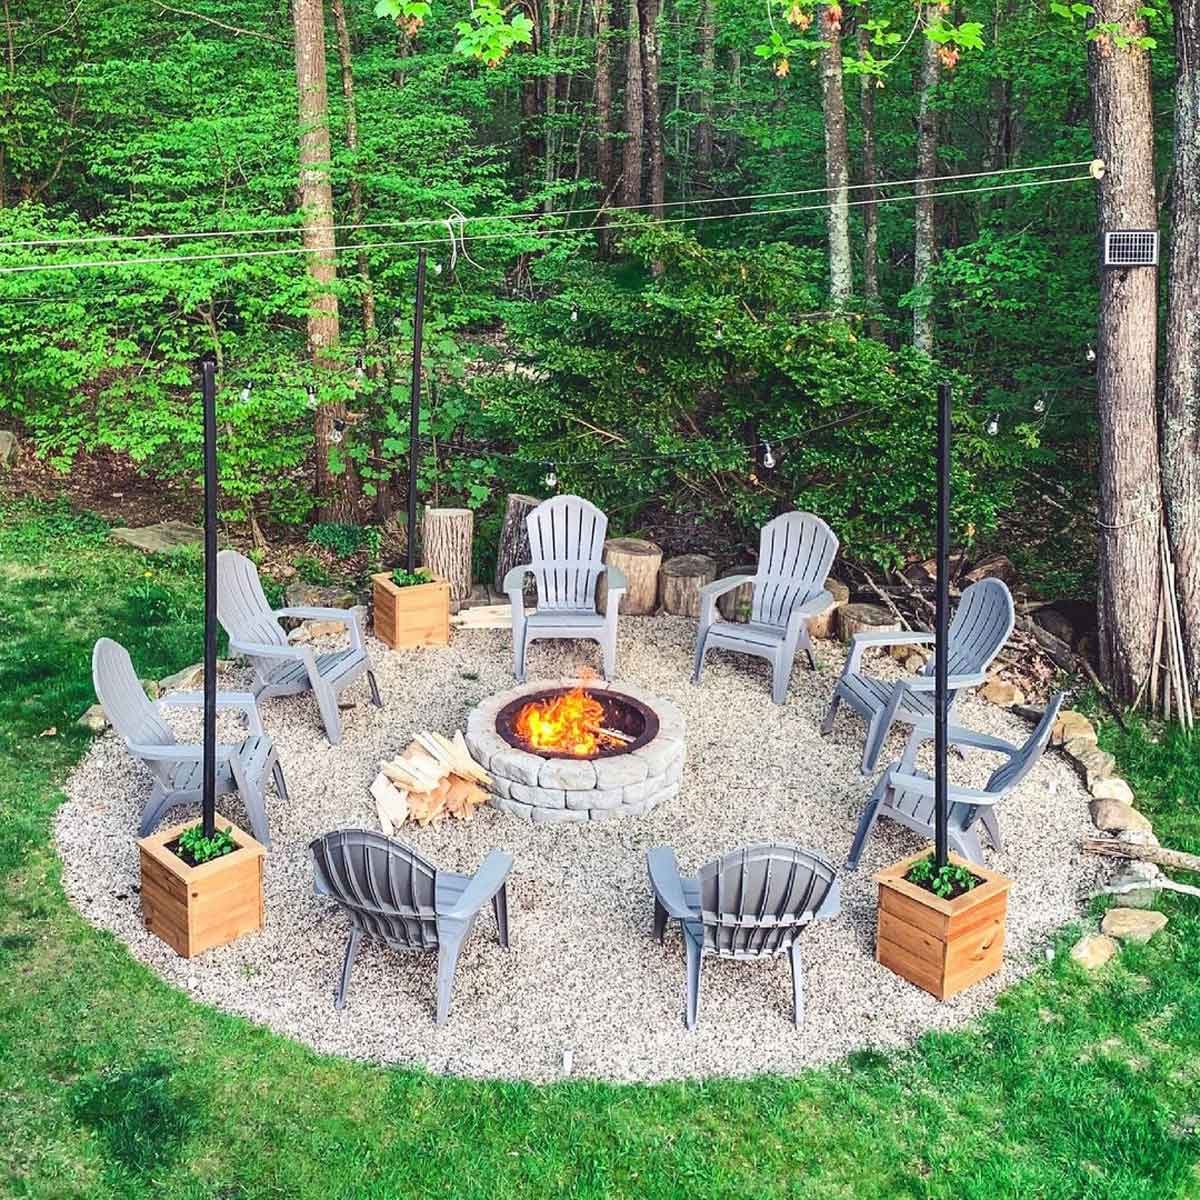 Sale > plastic chairs around fire pit > in stock